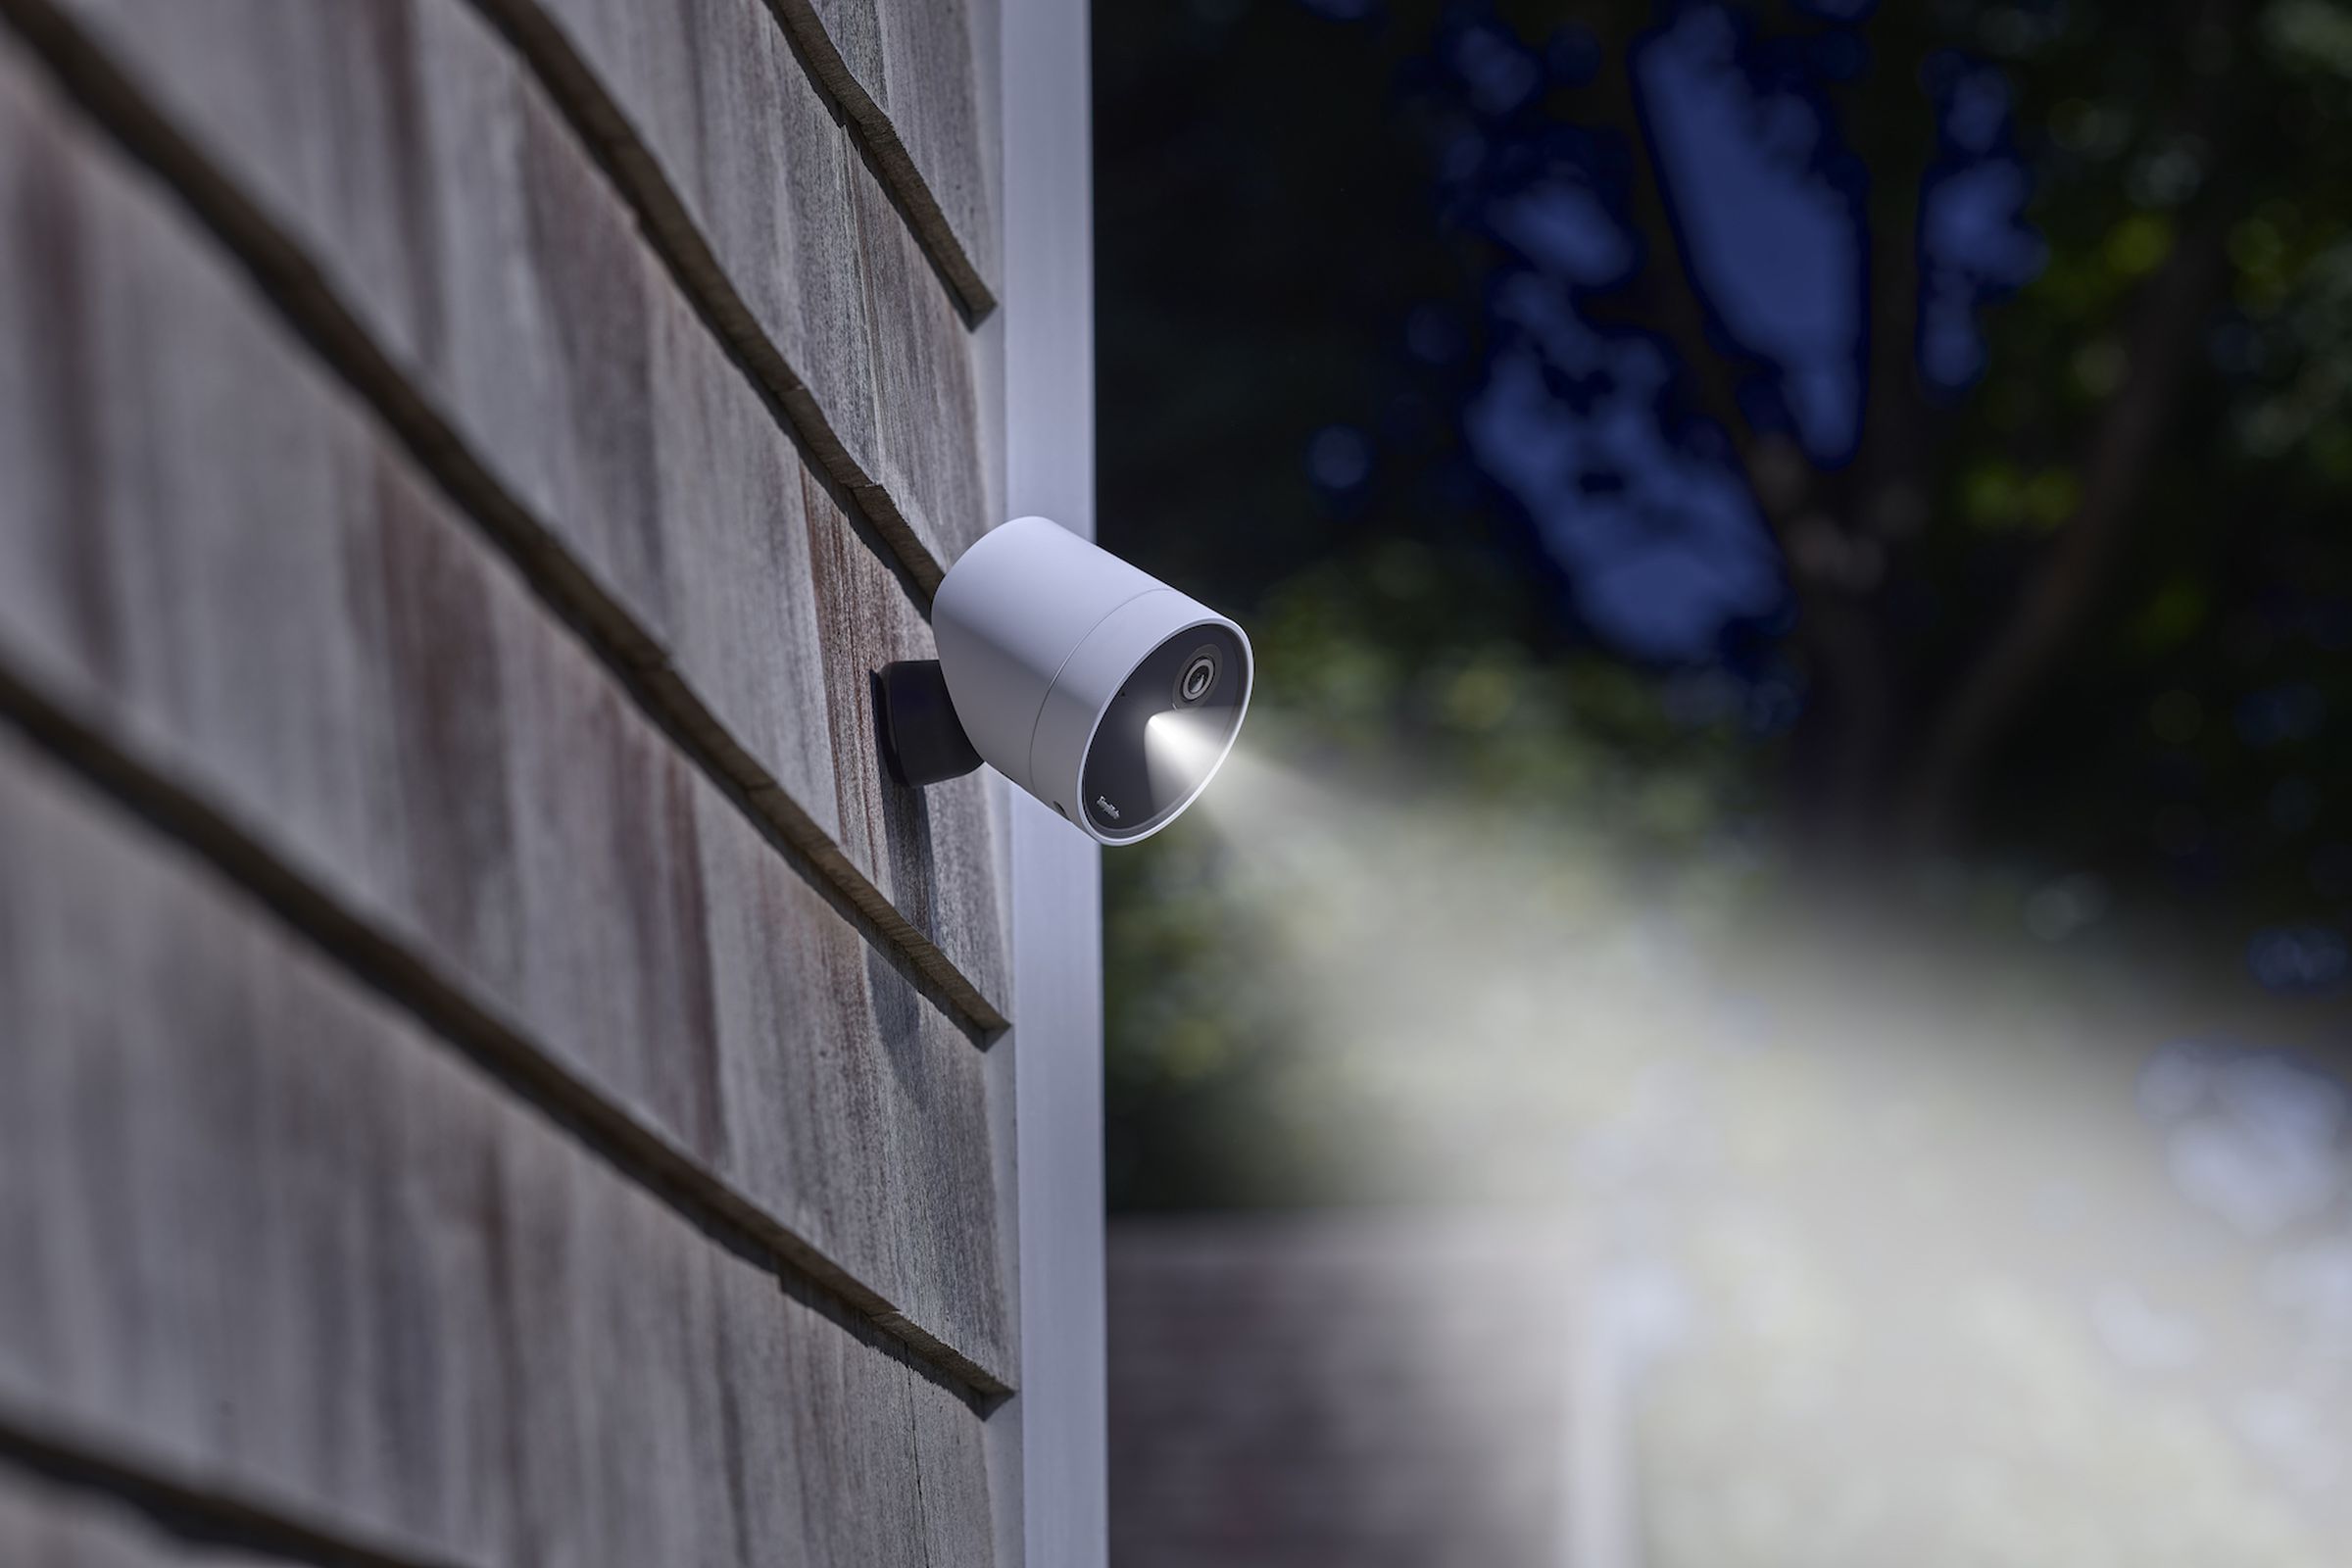 The SimpliSafe Wireless Outdoor Security Camera features an integrated LED light for color night vision.